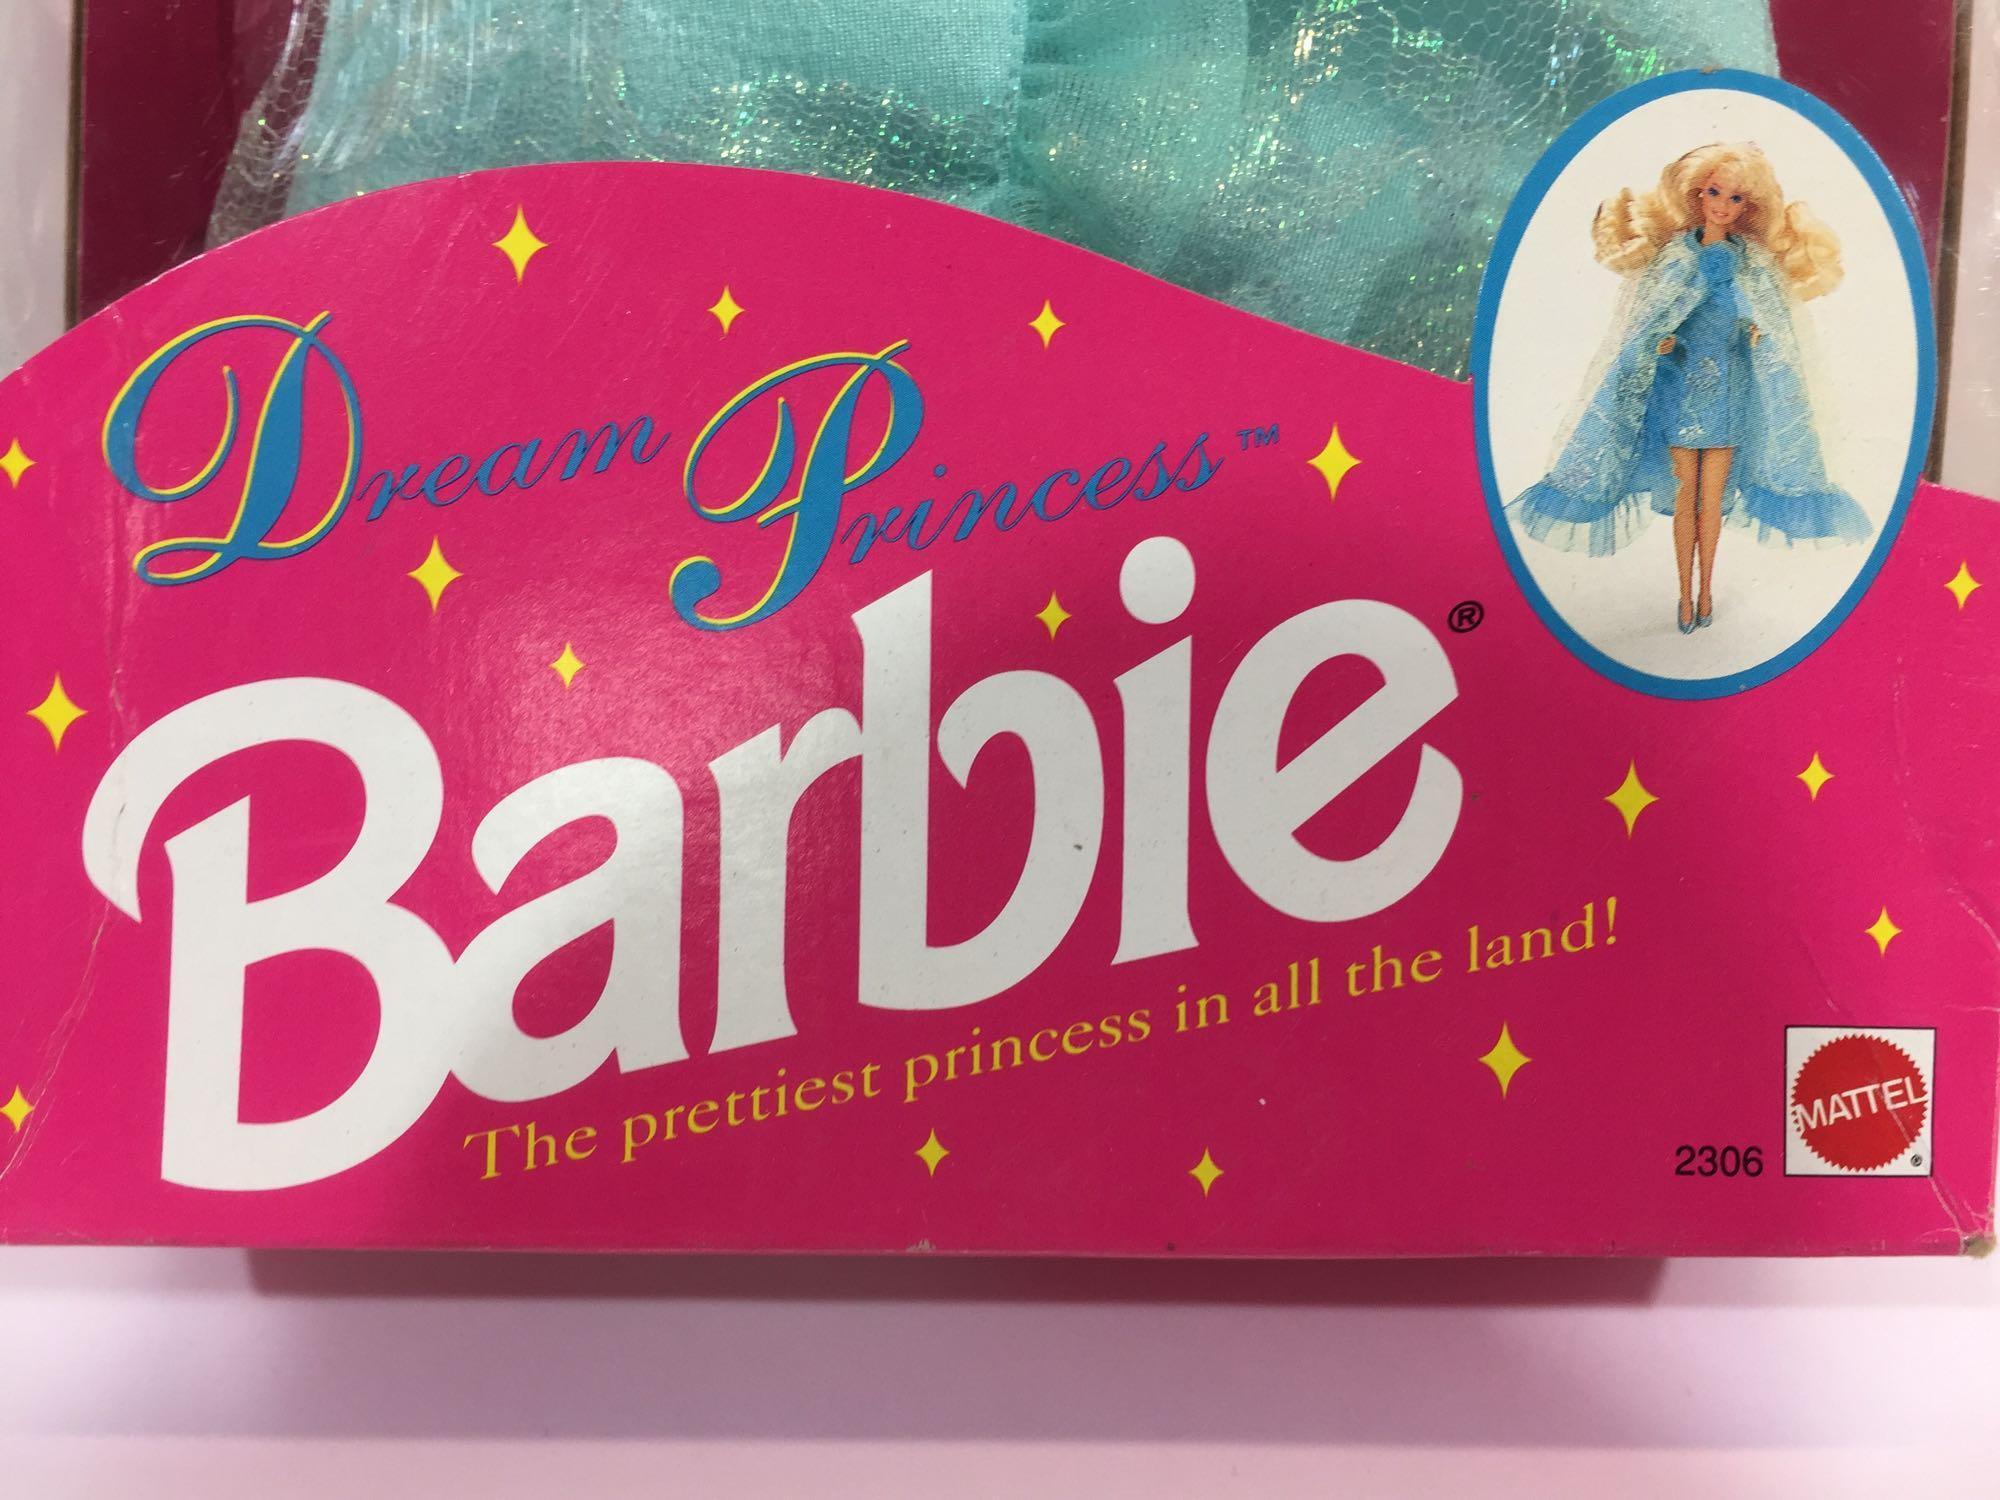 Limited Edition Dream Princess Barbie - New in Box 13in Tall